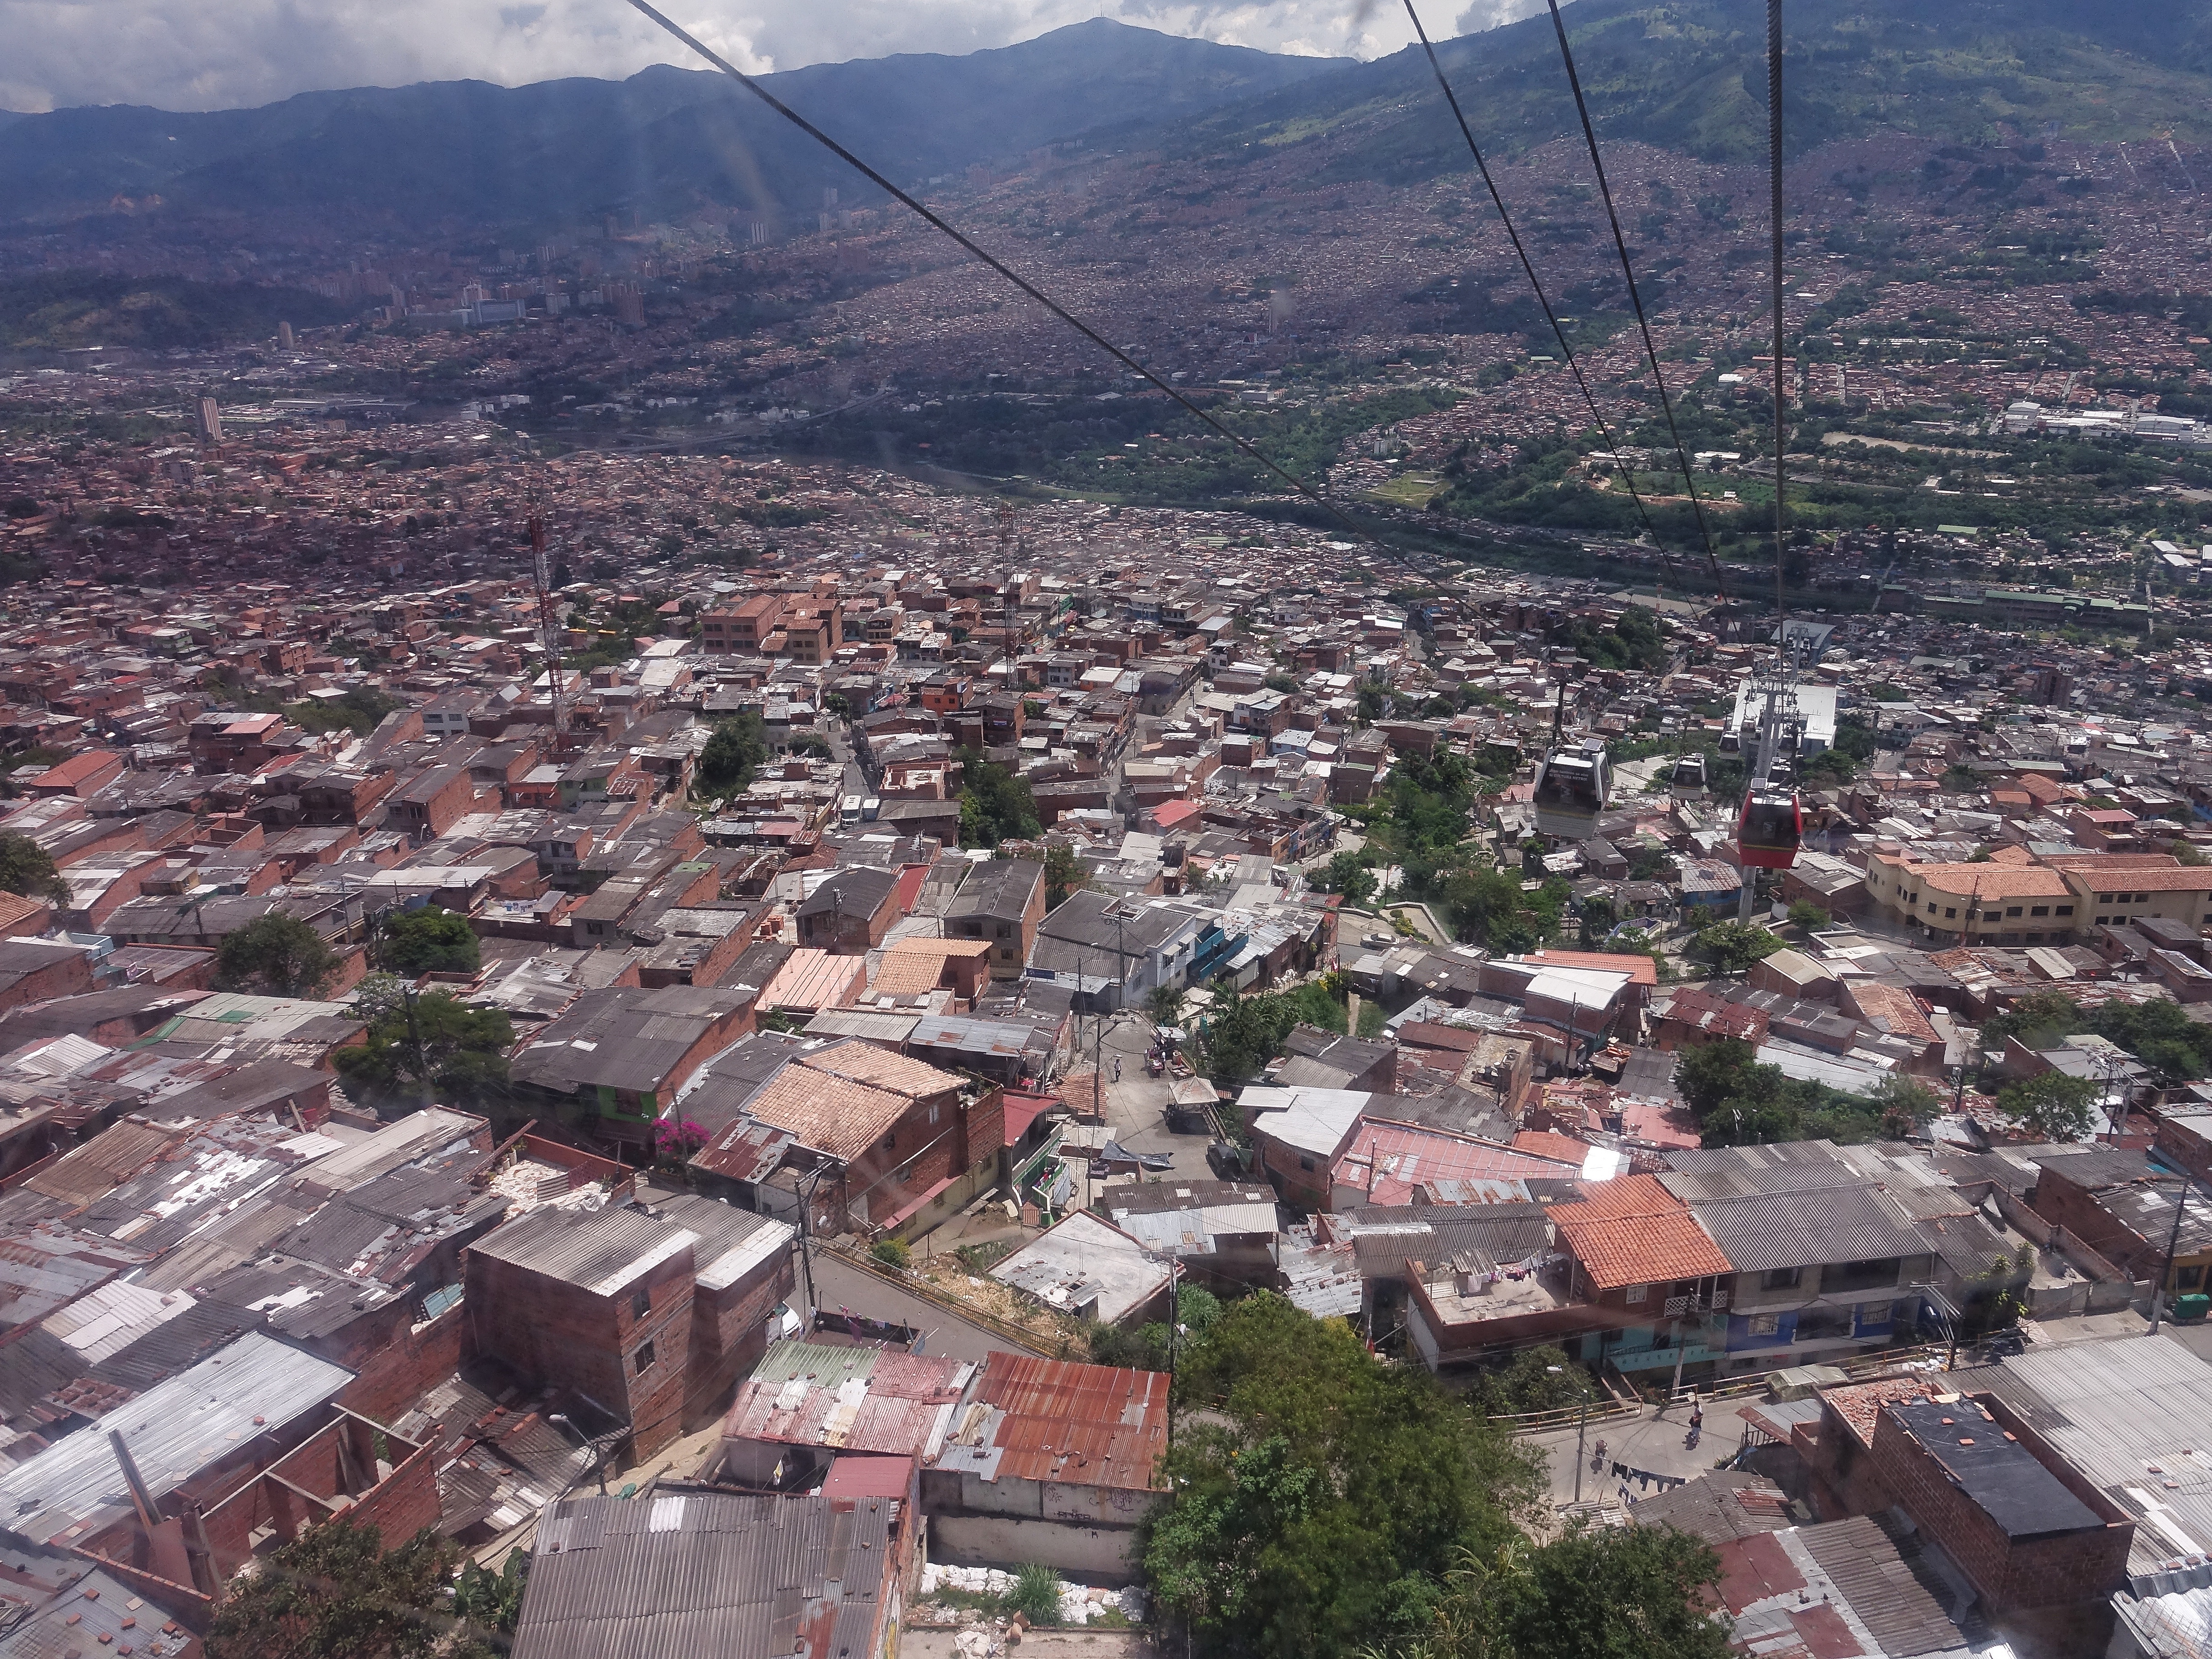 Good view of the city from the cable car